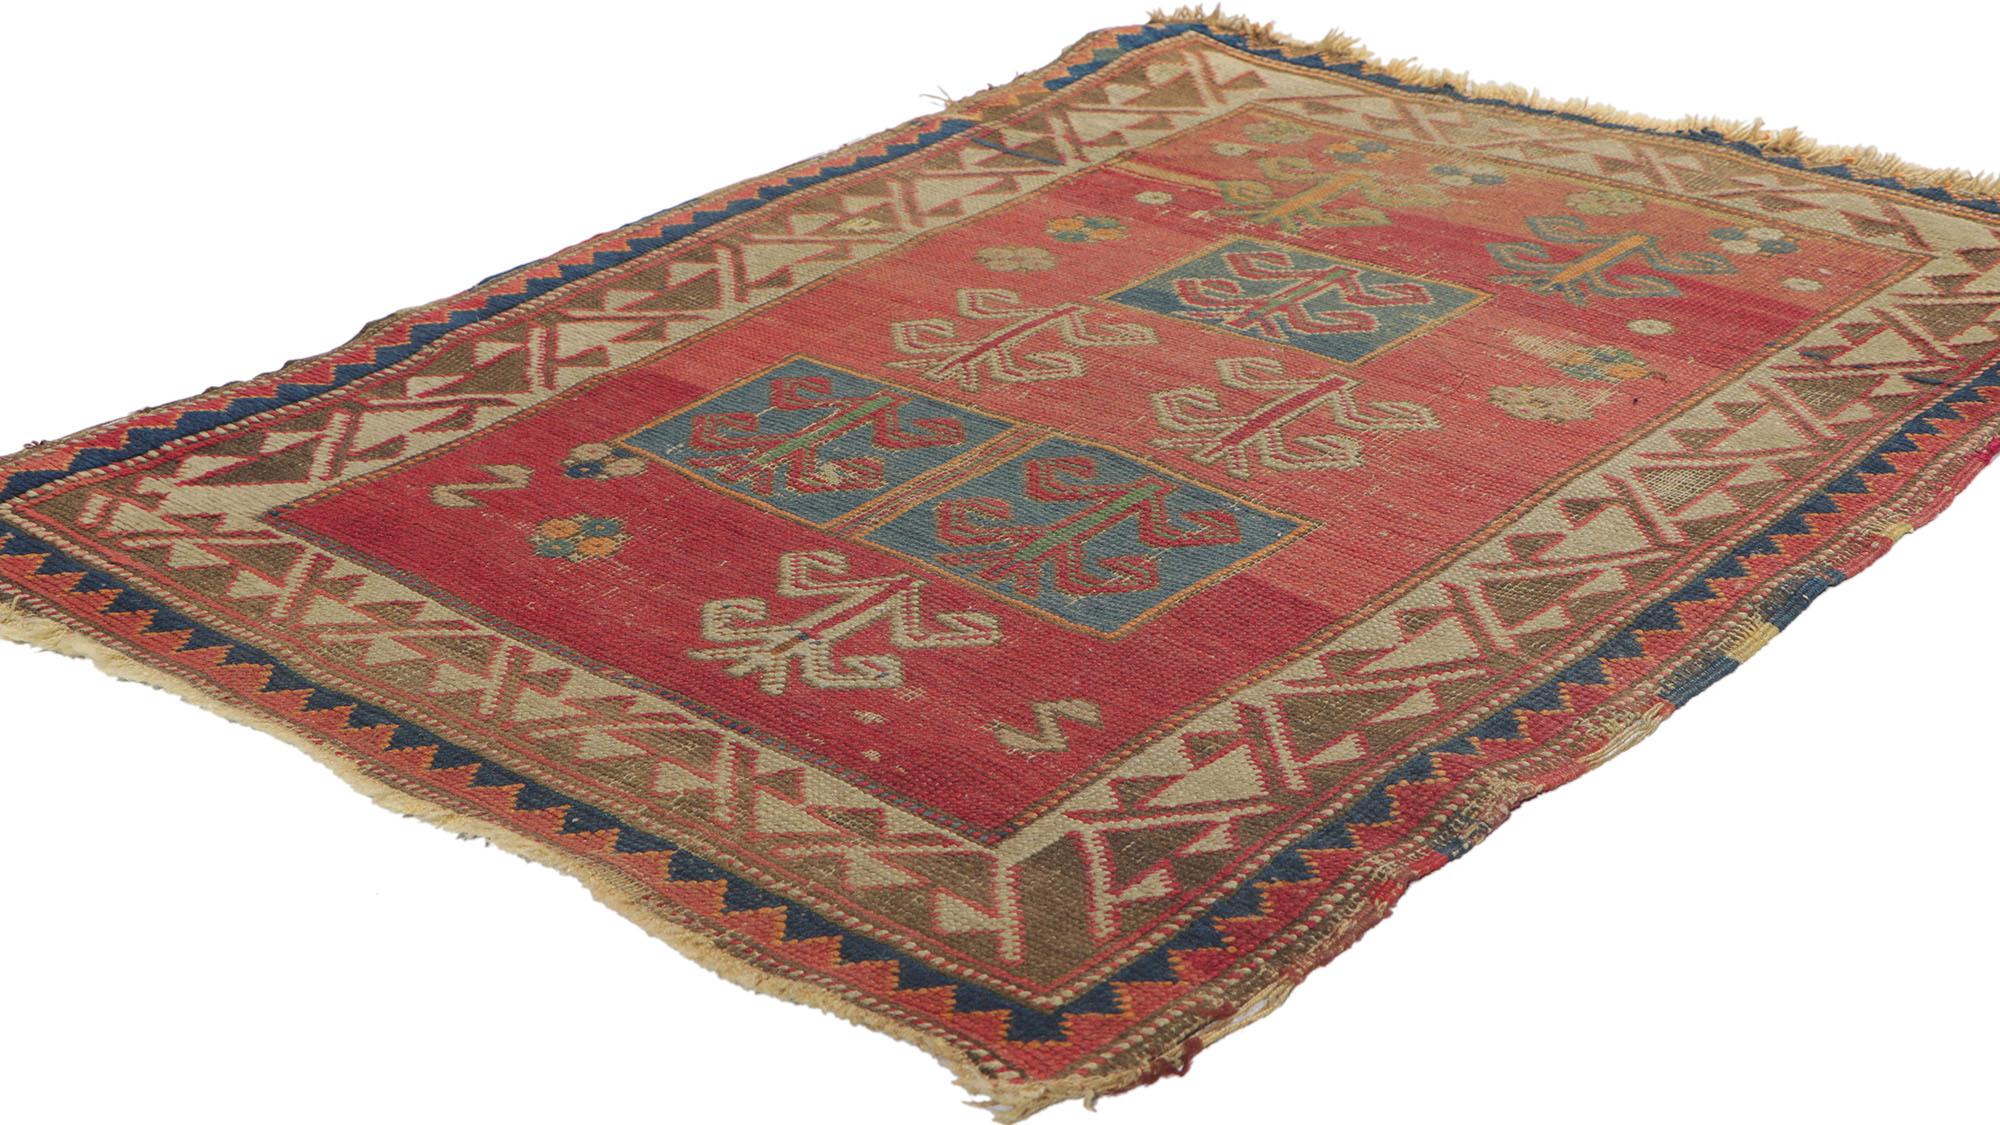 74498, distressed antique Russian tribal Bordjalou Kazak rug with compartment design, Caucasian rug. With its perfectly worn-in charm, time-softened colors and edgy elements, this weathered Bordjalou Kazak rug will create a warm, lived-in look and